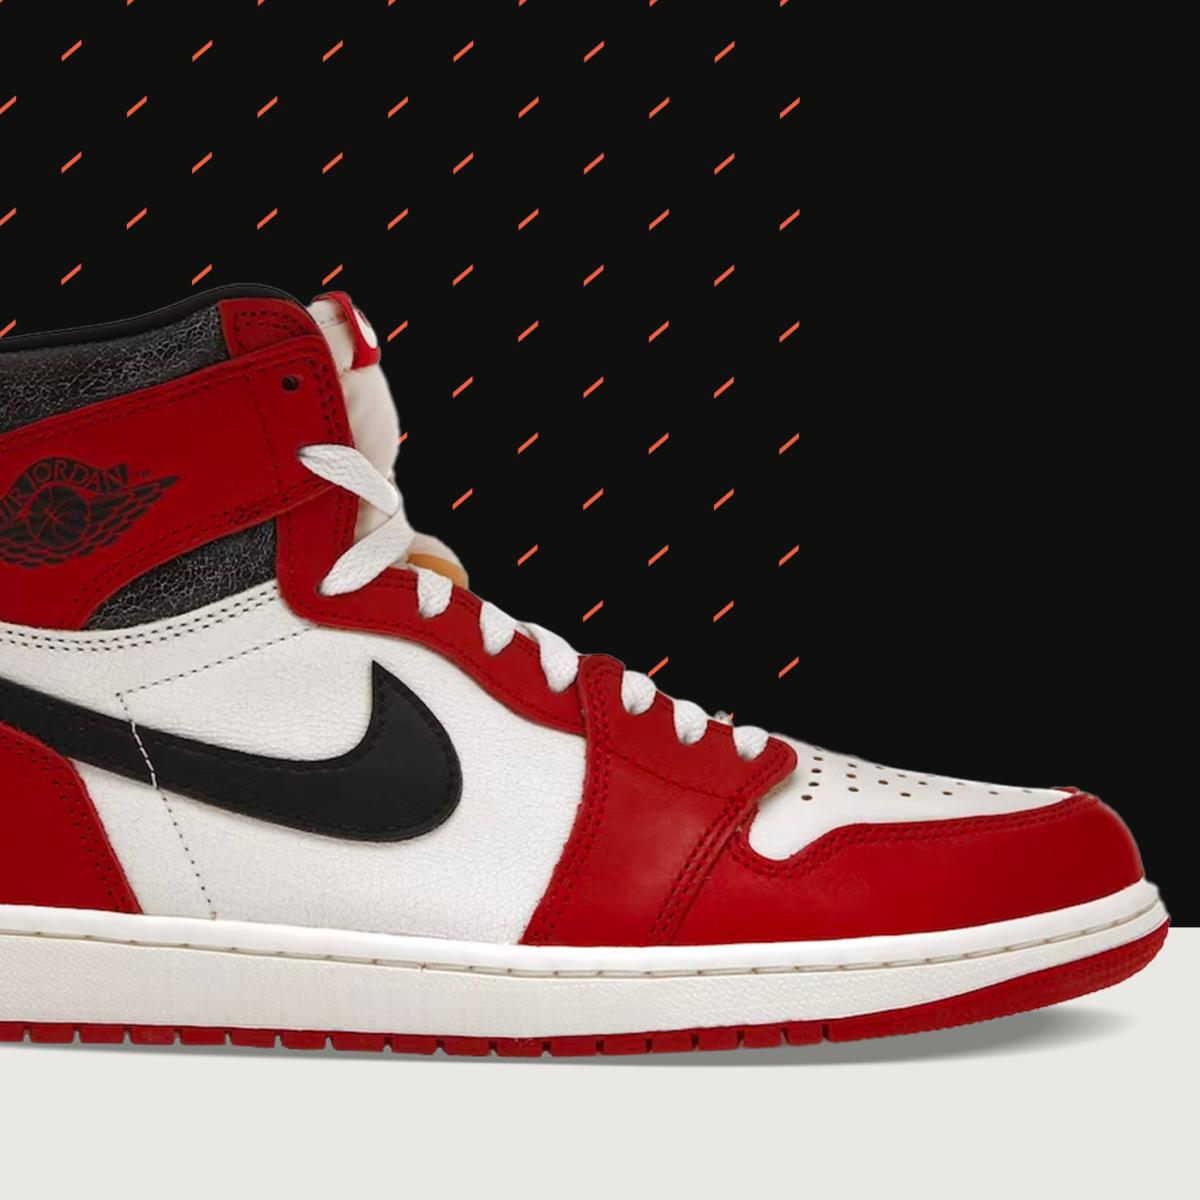 REAL VS FAKE! NIKE AIR JORDAN 1 LOST AND FOUND CHICAGO UPDATED